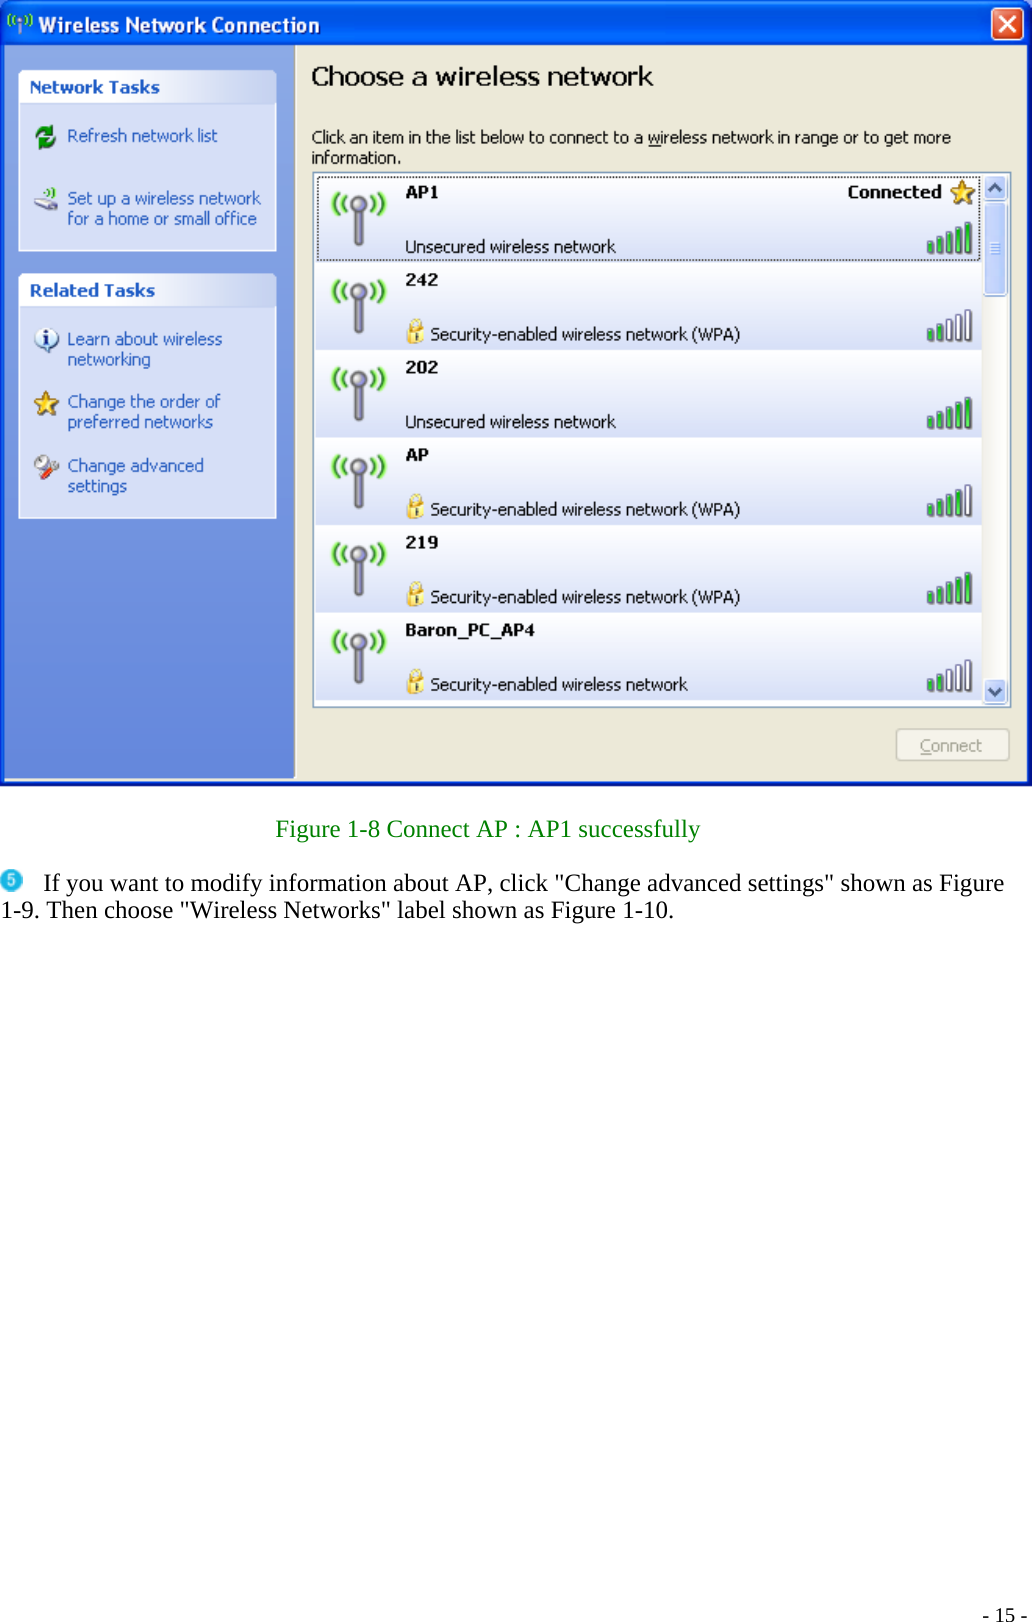   Figure 1-8 Connect AP : AP1 successfully    If you want to modify information about AP, click &quot;Change advanced settings&quot; shown as Figure 1-9. Then choose &quot;Wireless Networks&quot; label shown as Figure 1-10.    - 15 -